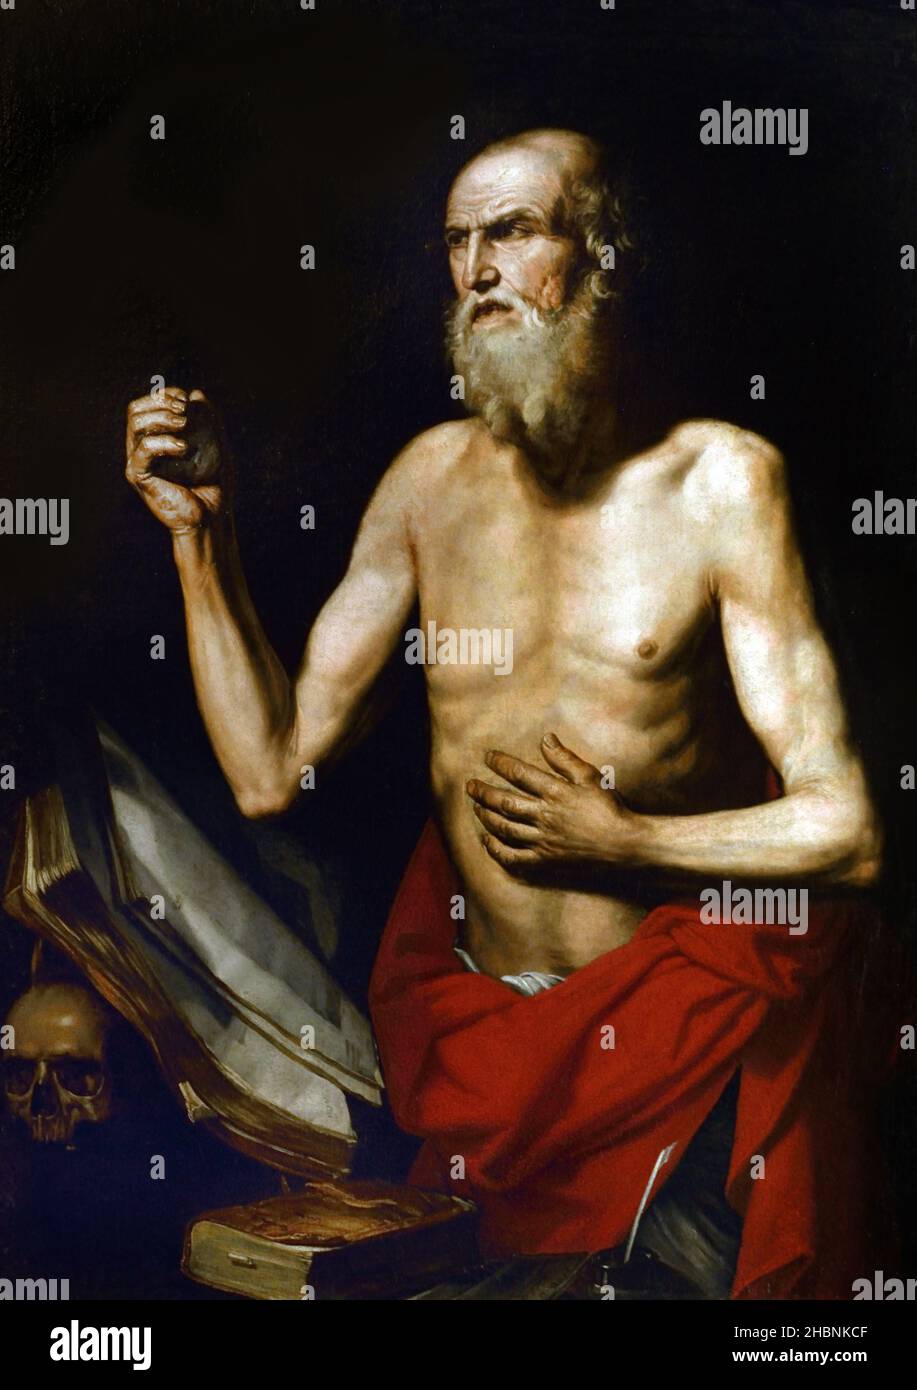 Penitente San Girolamo  - Penitent St. Jerome 1630 by Glielmo Francesco, Active in Naples in the 17th century Italy, Italian, (  Francesco Glielmo, is still little known. Trained in Naples at the beginning of the seventeenth century, he was strongly influenced by the lesson of Caravaggio ) Stock Photo